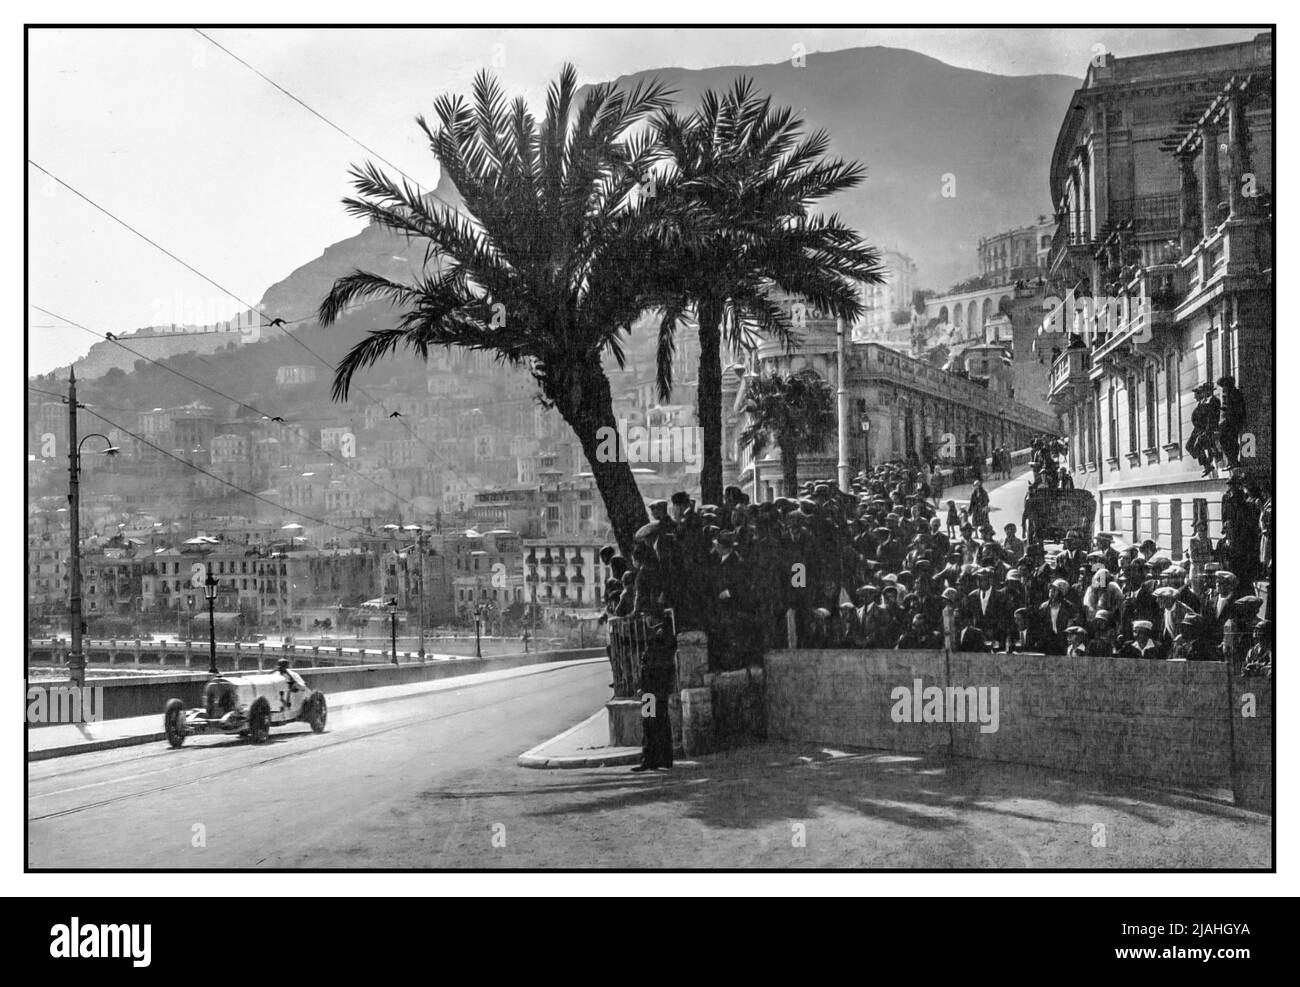 1929 Monaco Grand Prix the first to be held in Monaco with Rudolf Caracciola in a Mercedes-Benz SSK (W06) race number 34  a roadster built by German automobile manufacturer Mercedes-Benz between 1928 and 1932. The name is an abbreviation of Super Sport Kurz, German for 'Super Sport Short', as it was a short wheelbase development of the Mercedes-Benz Modell S. The SSK's extreme performance and numerous competitive successes made it one of the most highly regarded sports cars of its era.  Rudolf Caracciola came third after starting 15th on the grid a position given by a ballot. Stock Photo